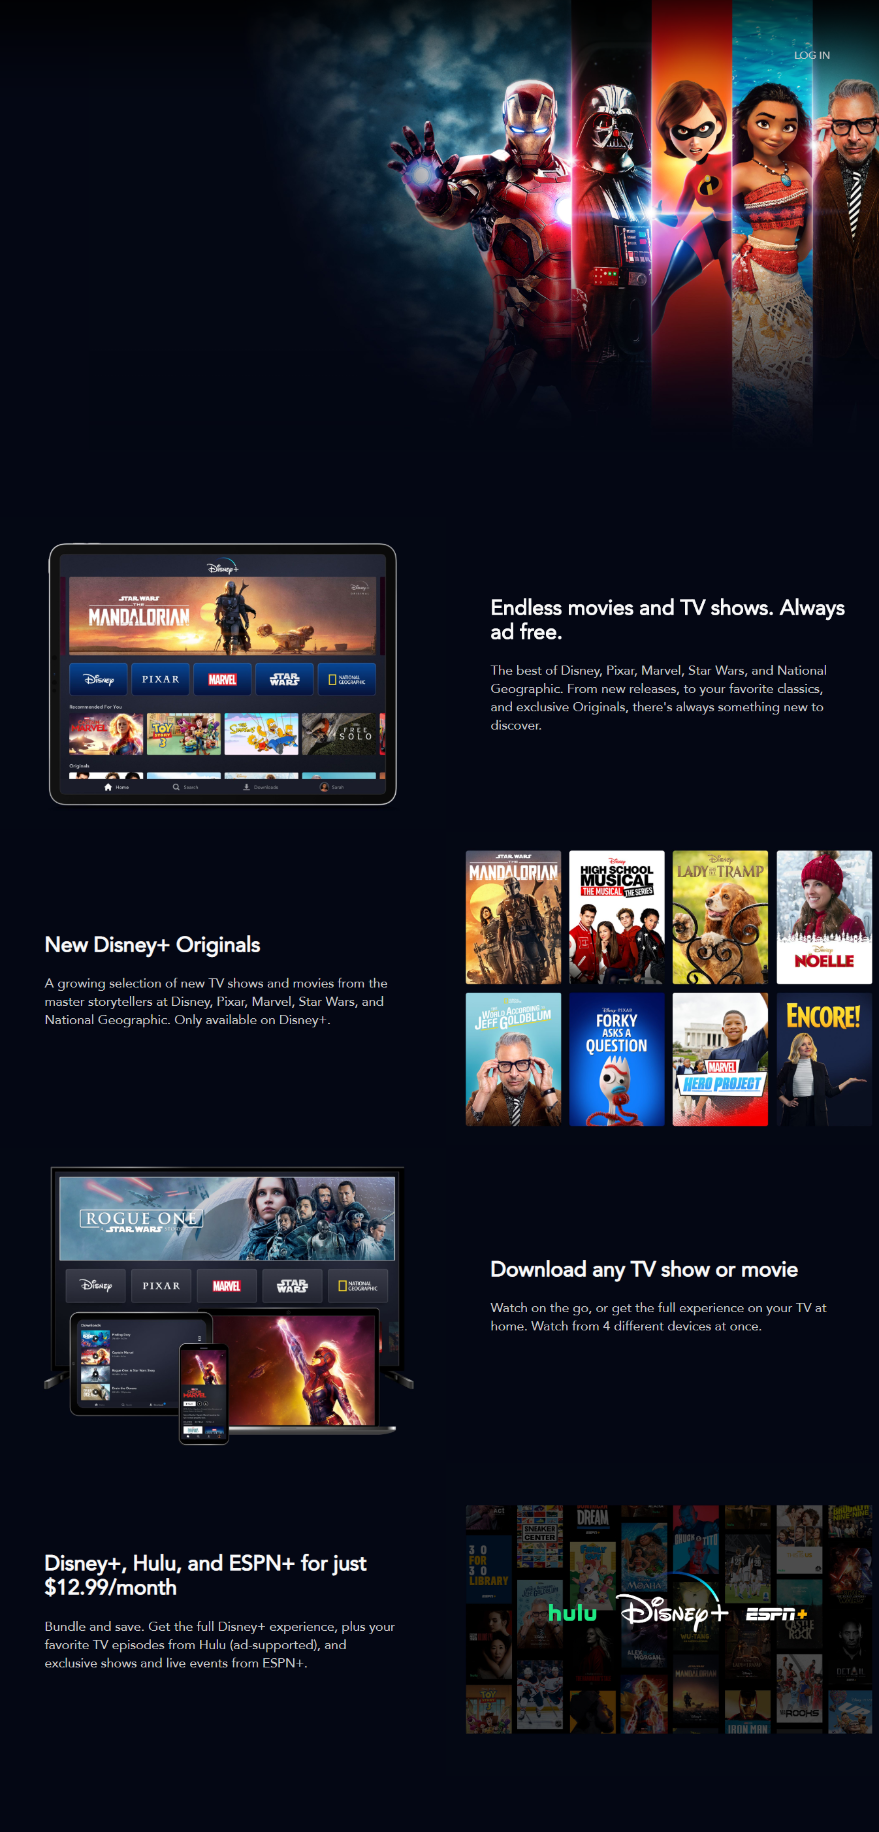 How To Get Disney+ Subscription and Watch online anywhere with VPN